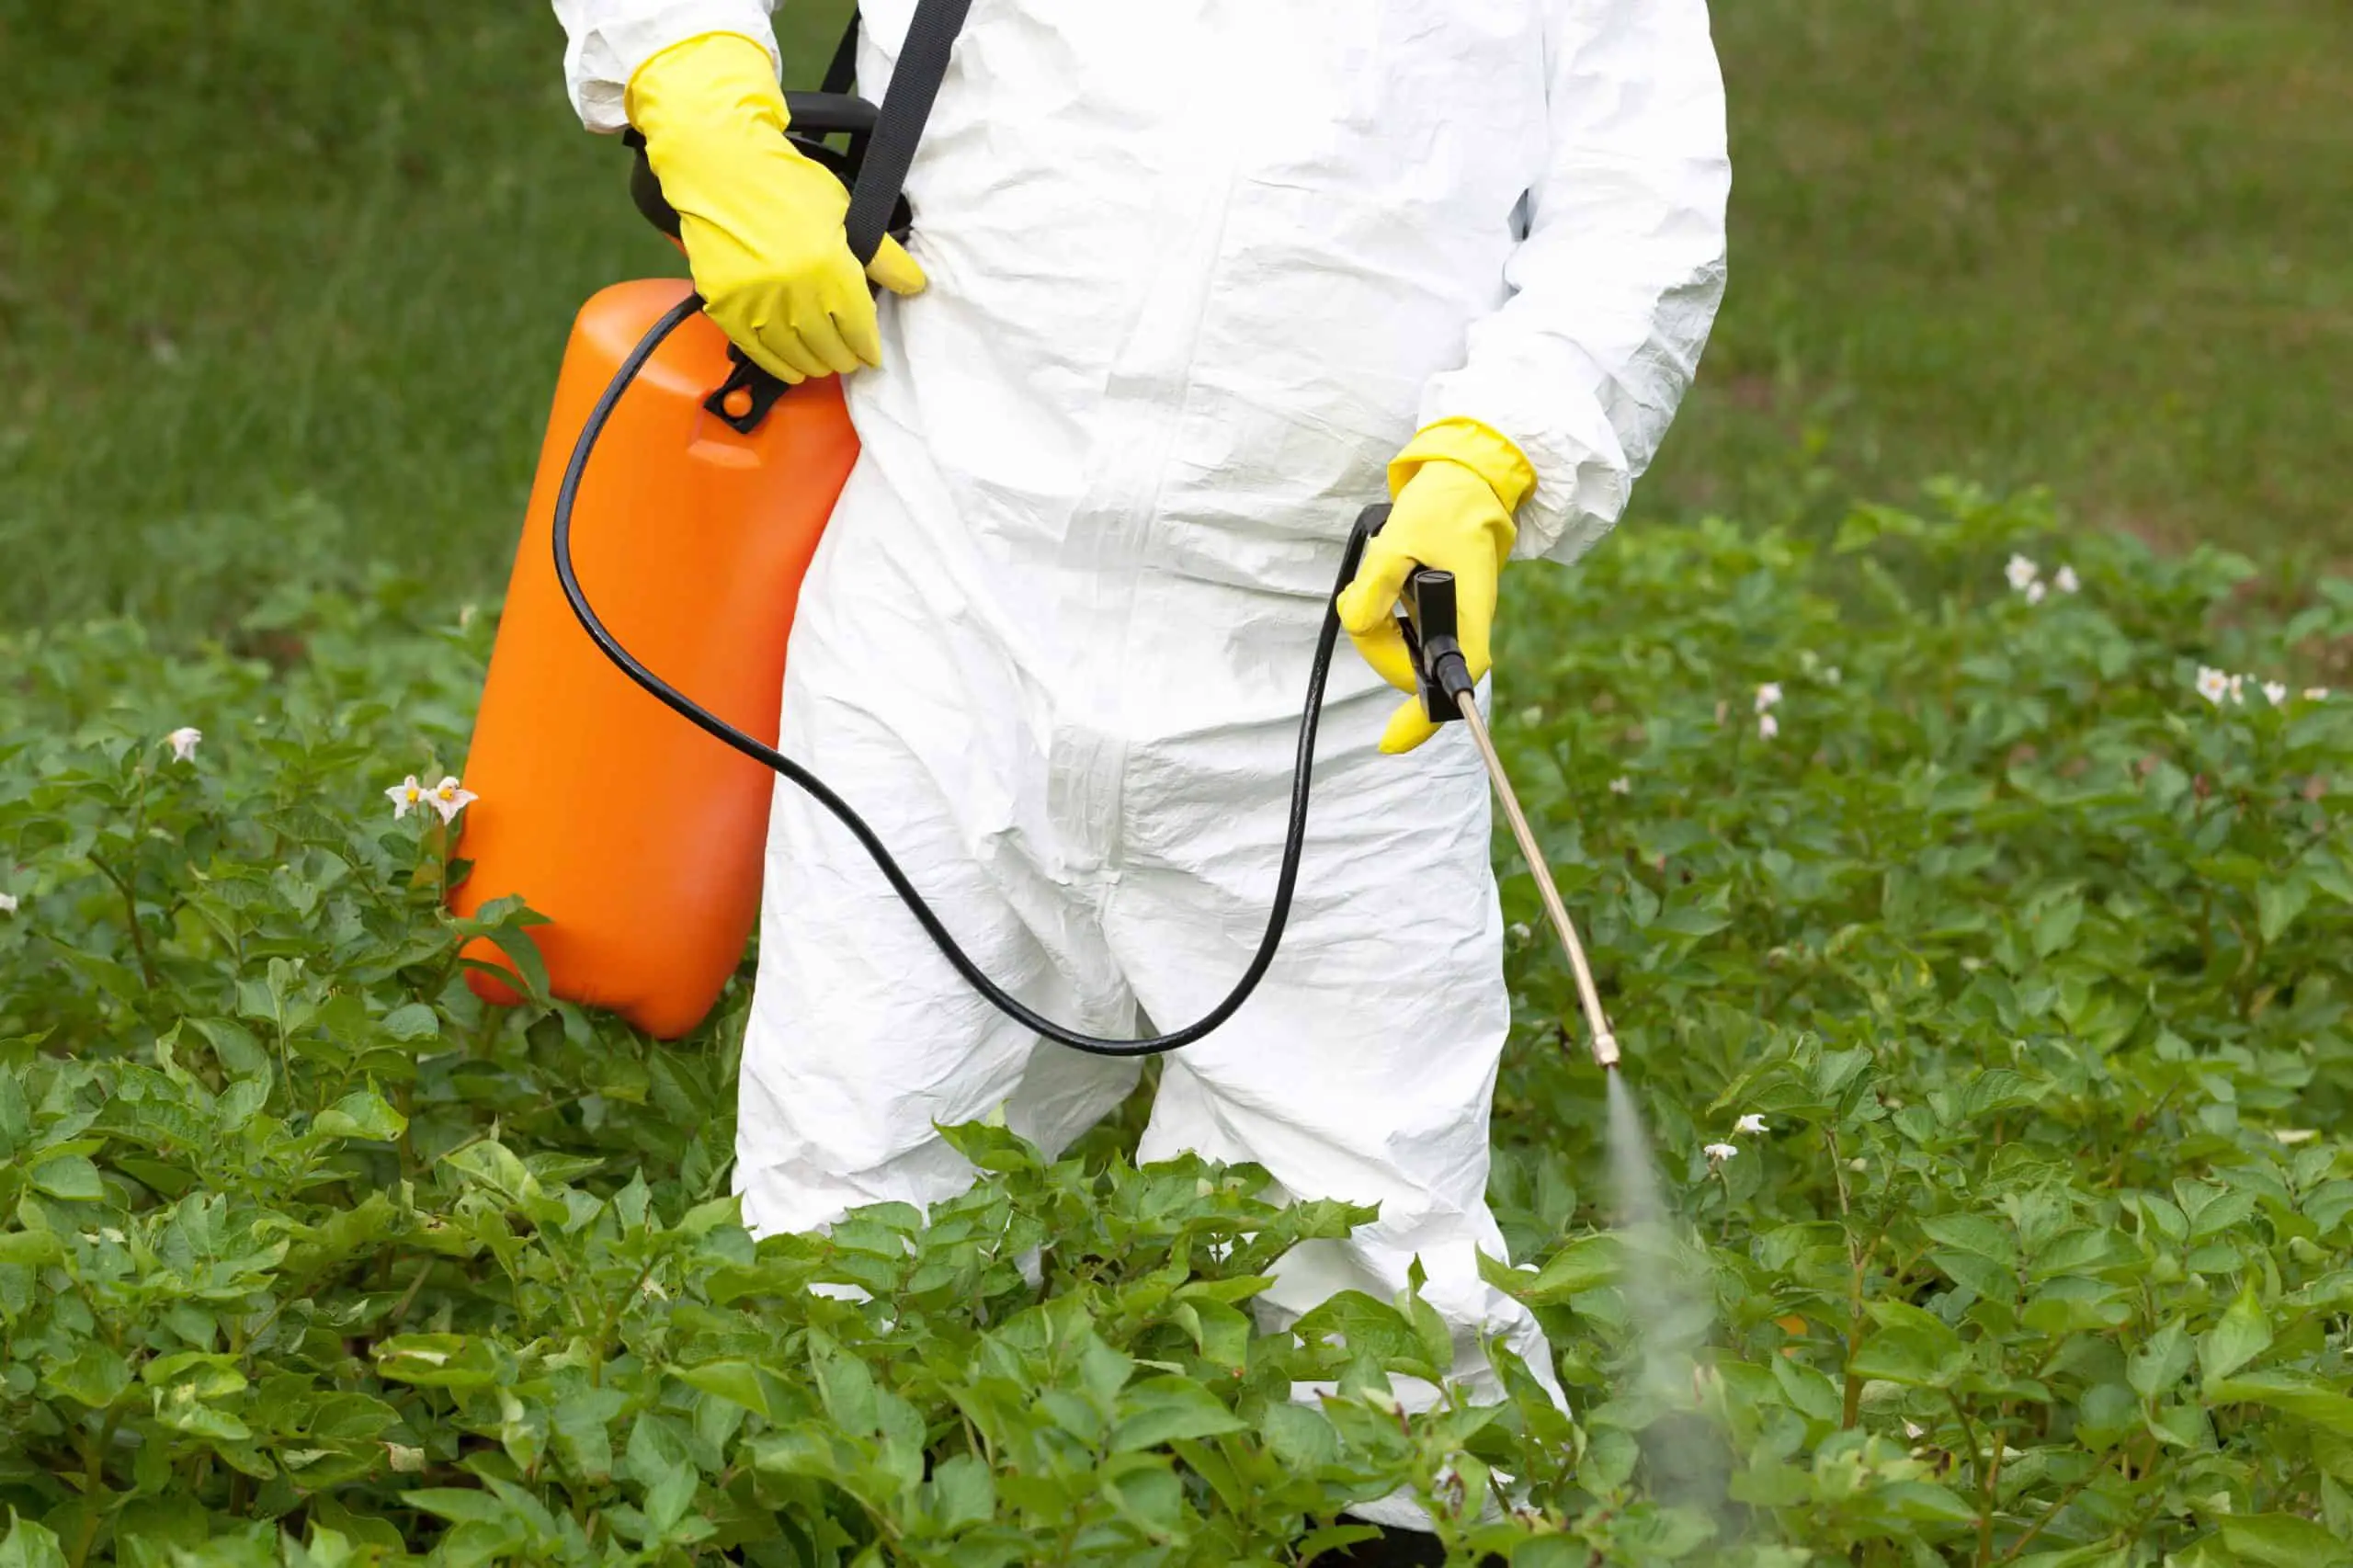 Japanese knotweed treatment via spraying glysophate chemicals scaled